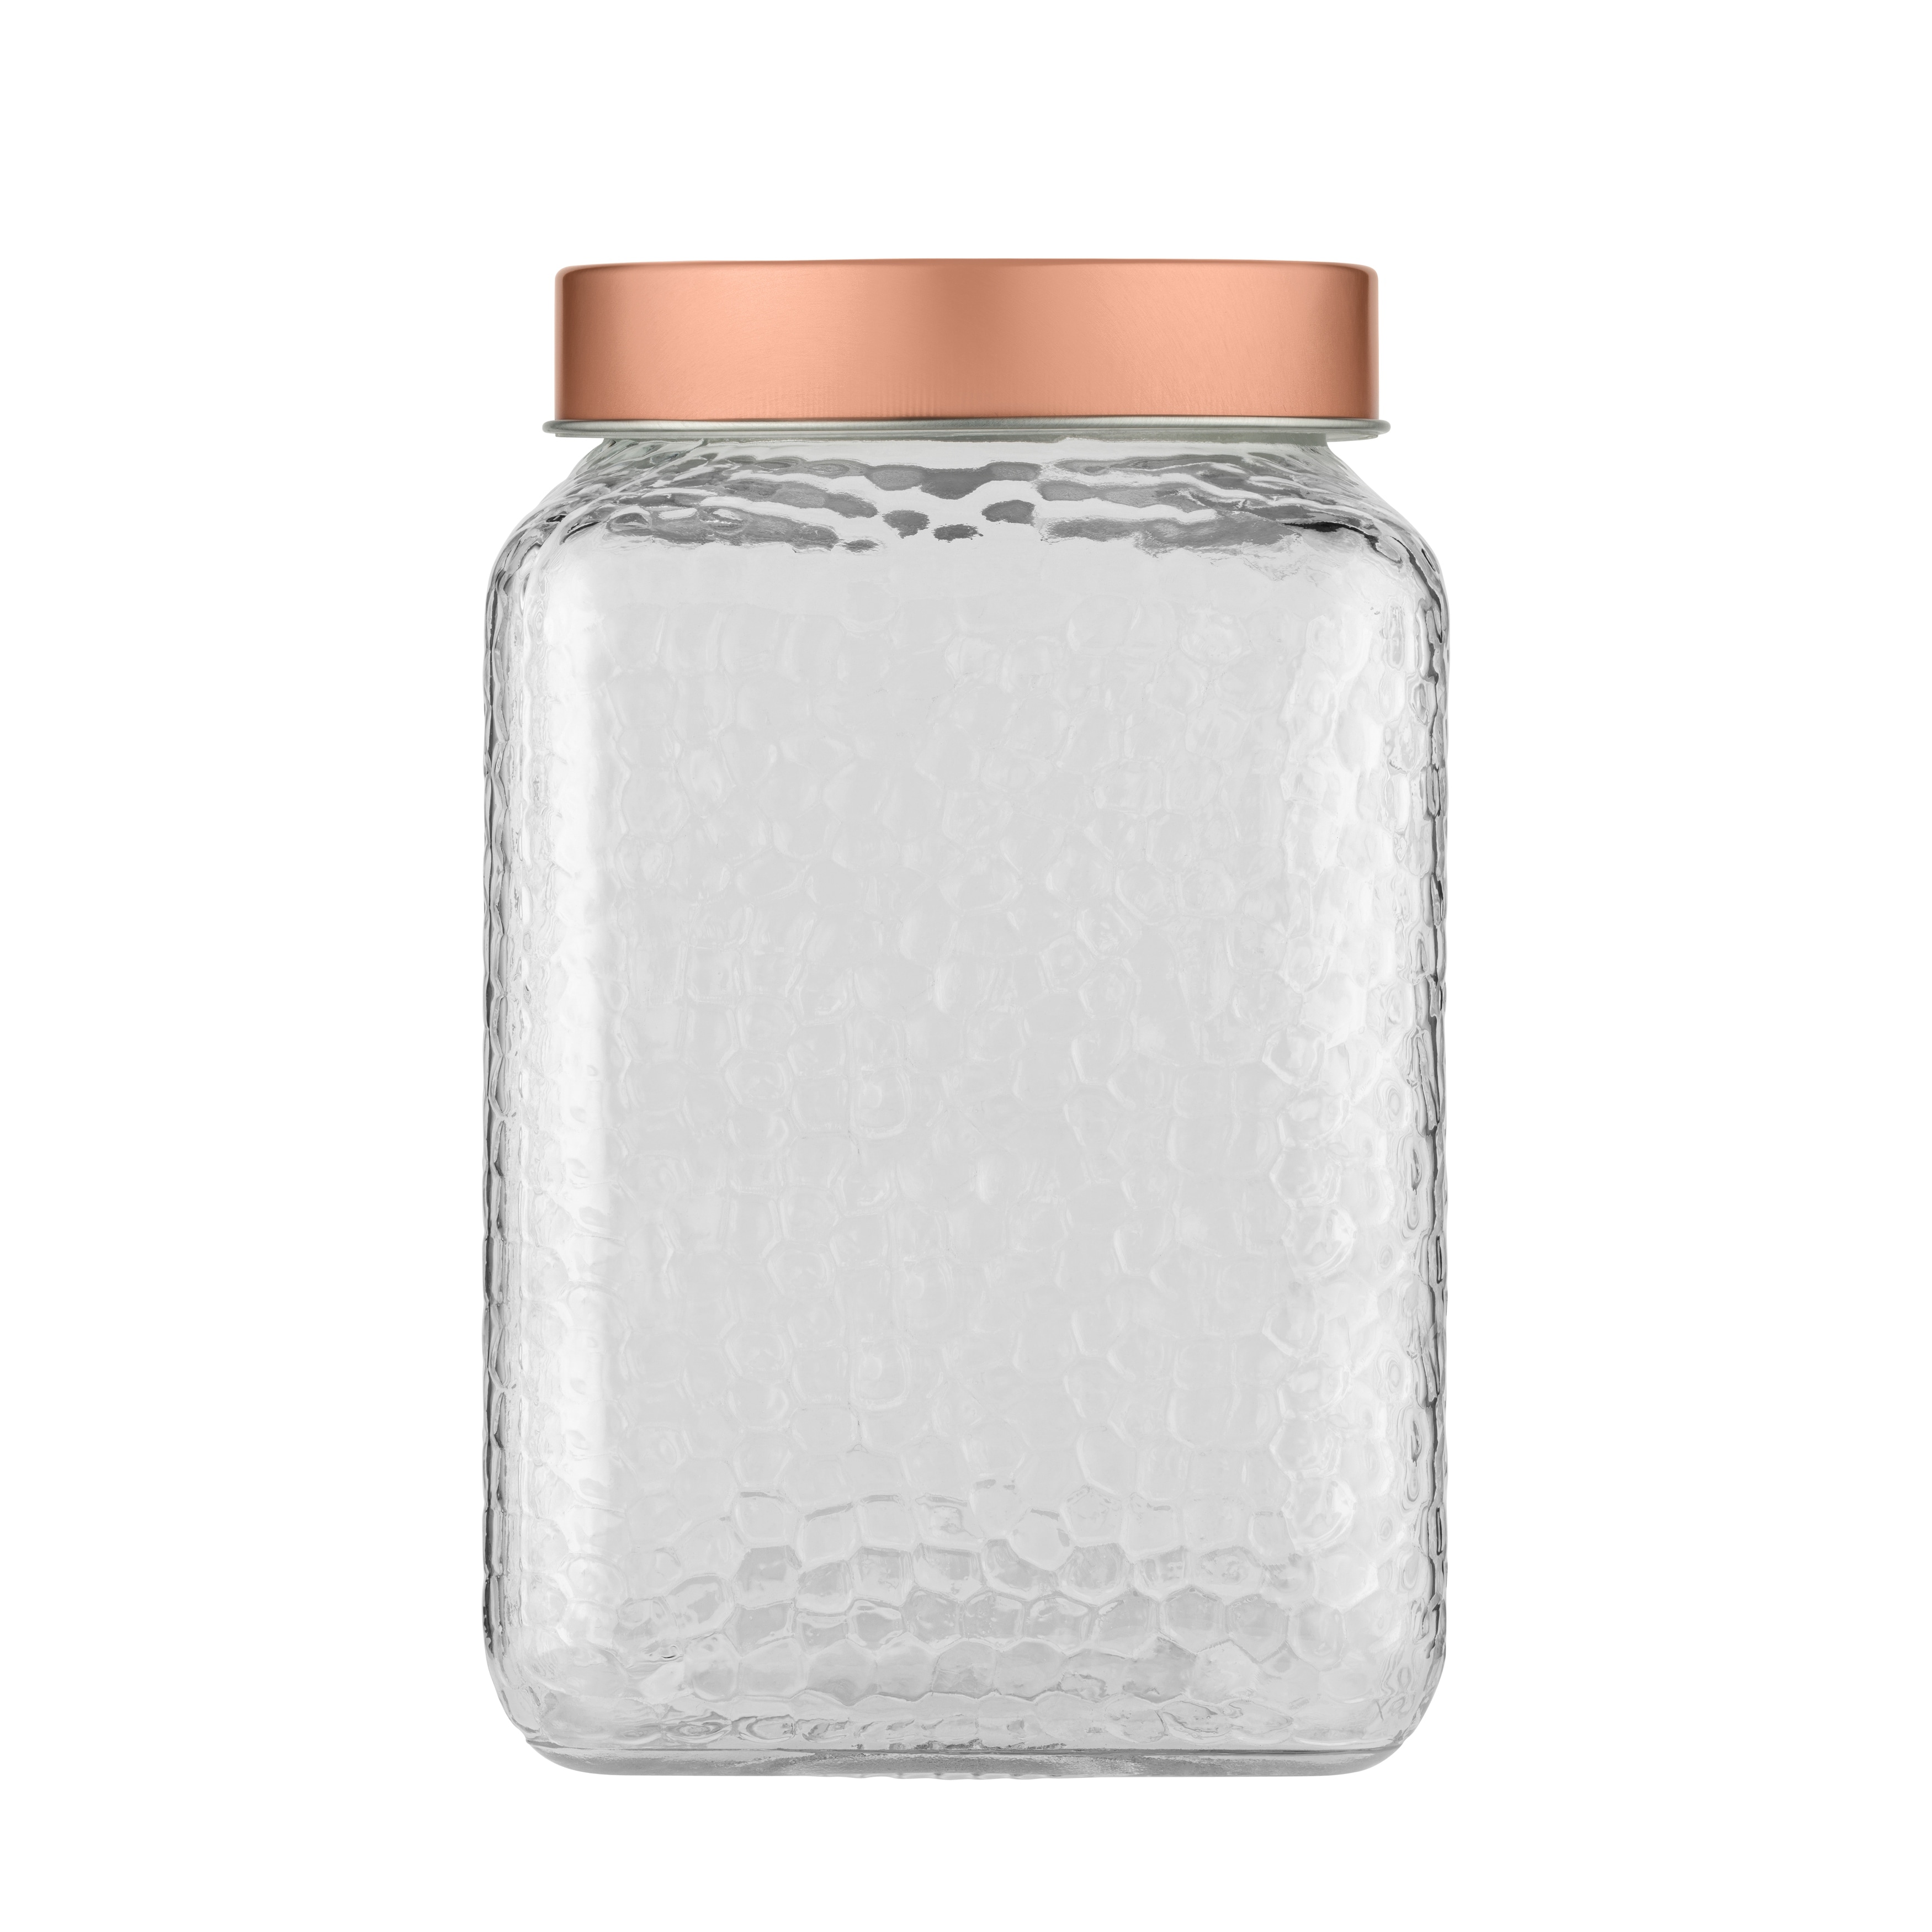 https://ak1.ostkcdn.com/images/products/is/images/direct/2585c74f1bac1ef7a2bc728b64d695ff9ed84b17/Amici-Home-Sierra-Glass-Canister-Container-Storage-Jar.jpg